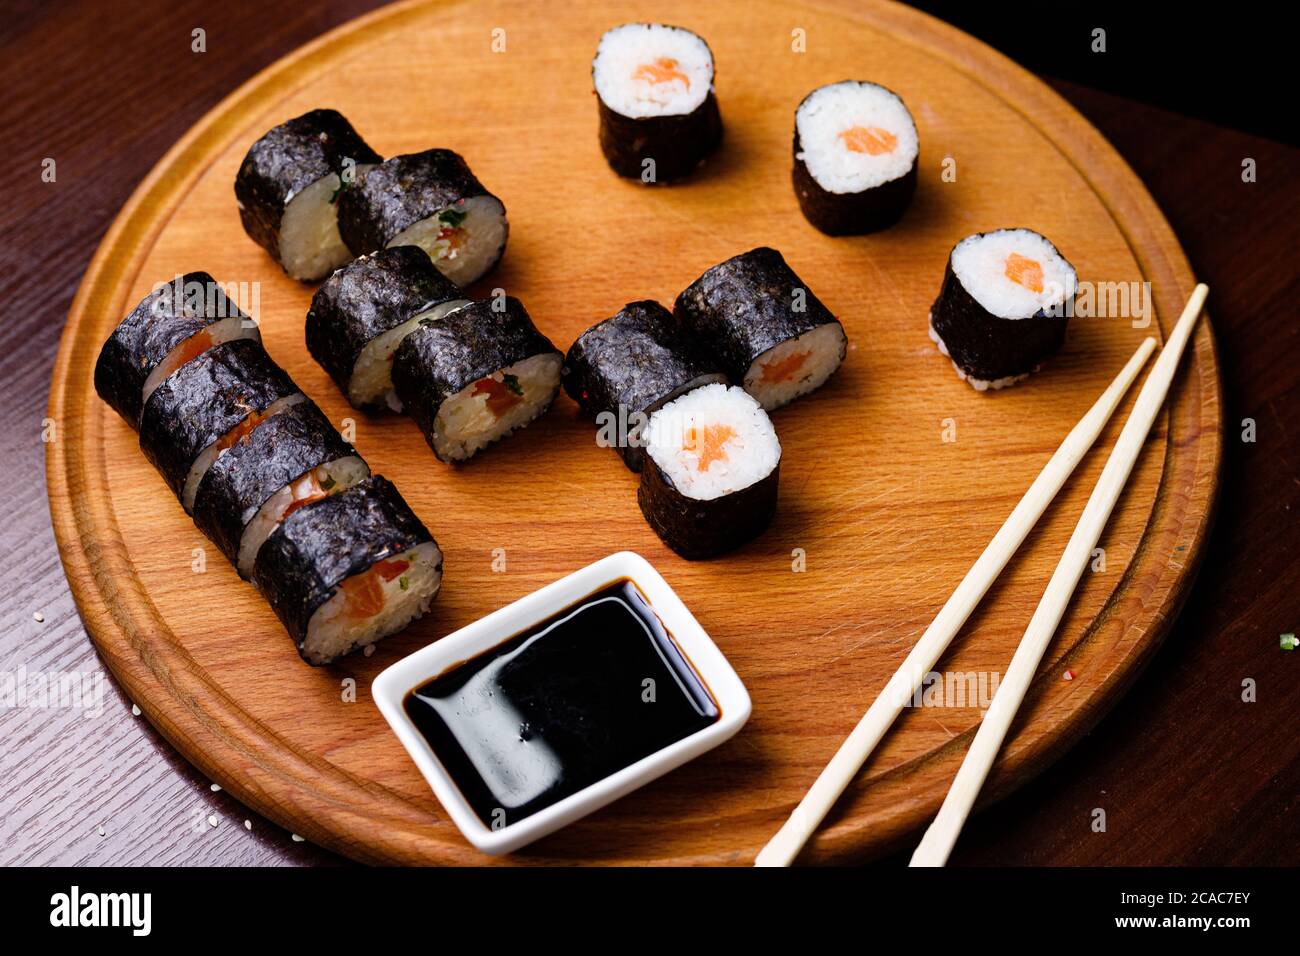 Sushi with salmon. Soy sauce, red caviar. Sushi on a black background. Stock Photo